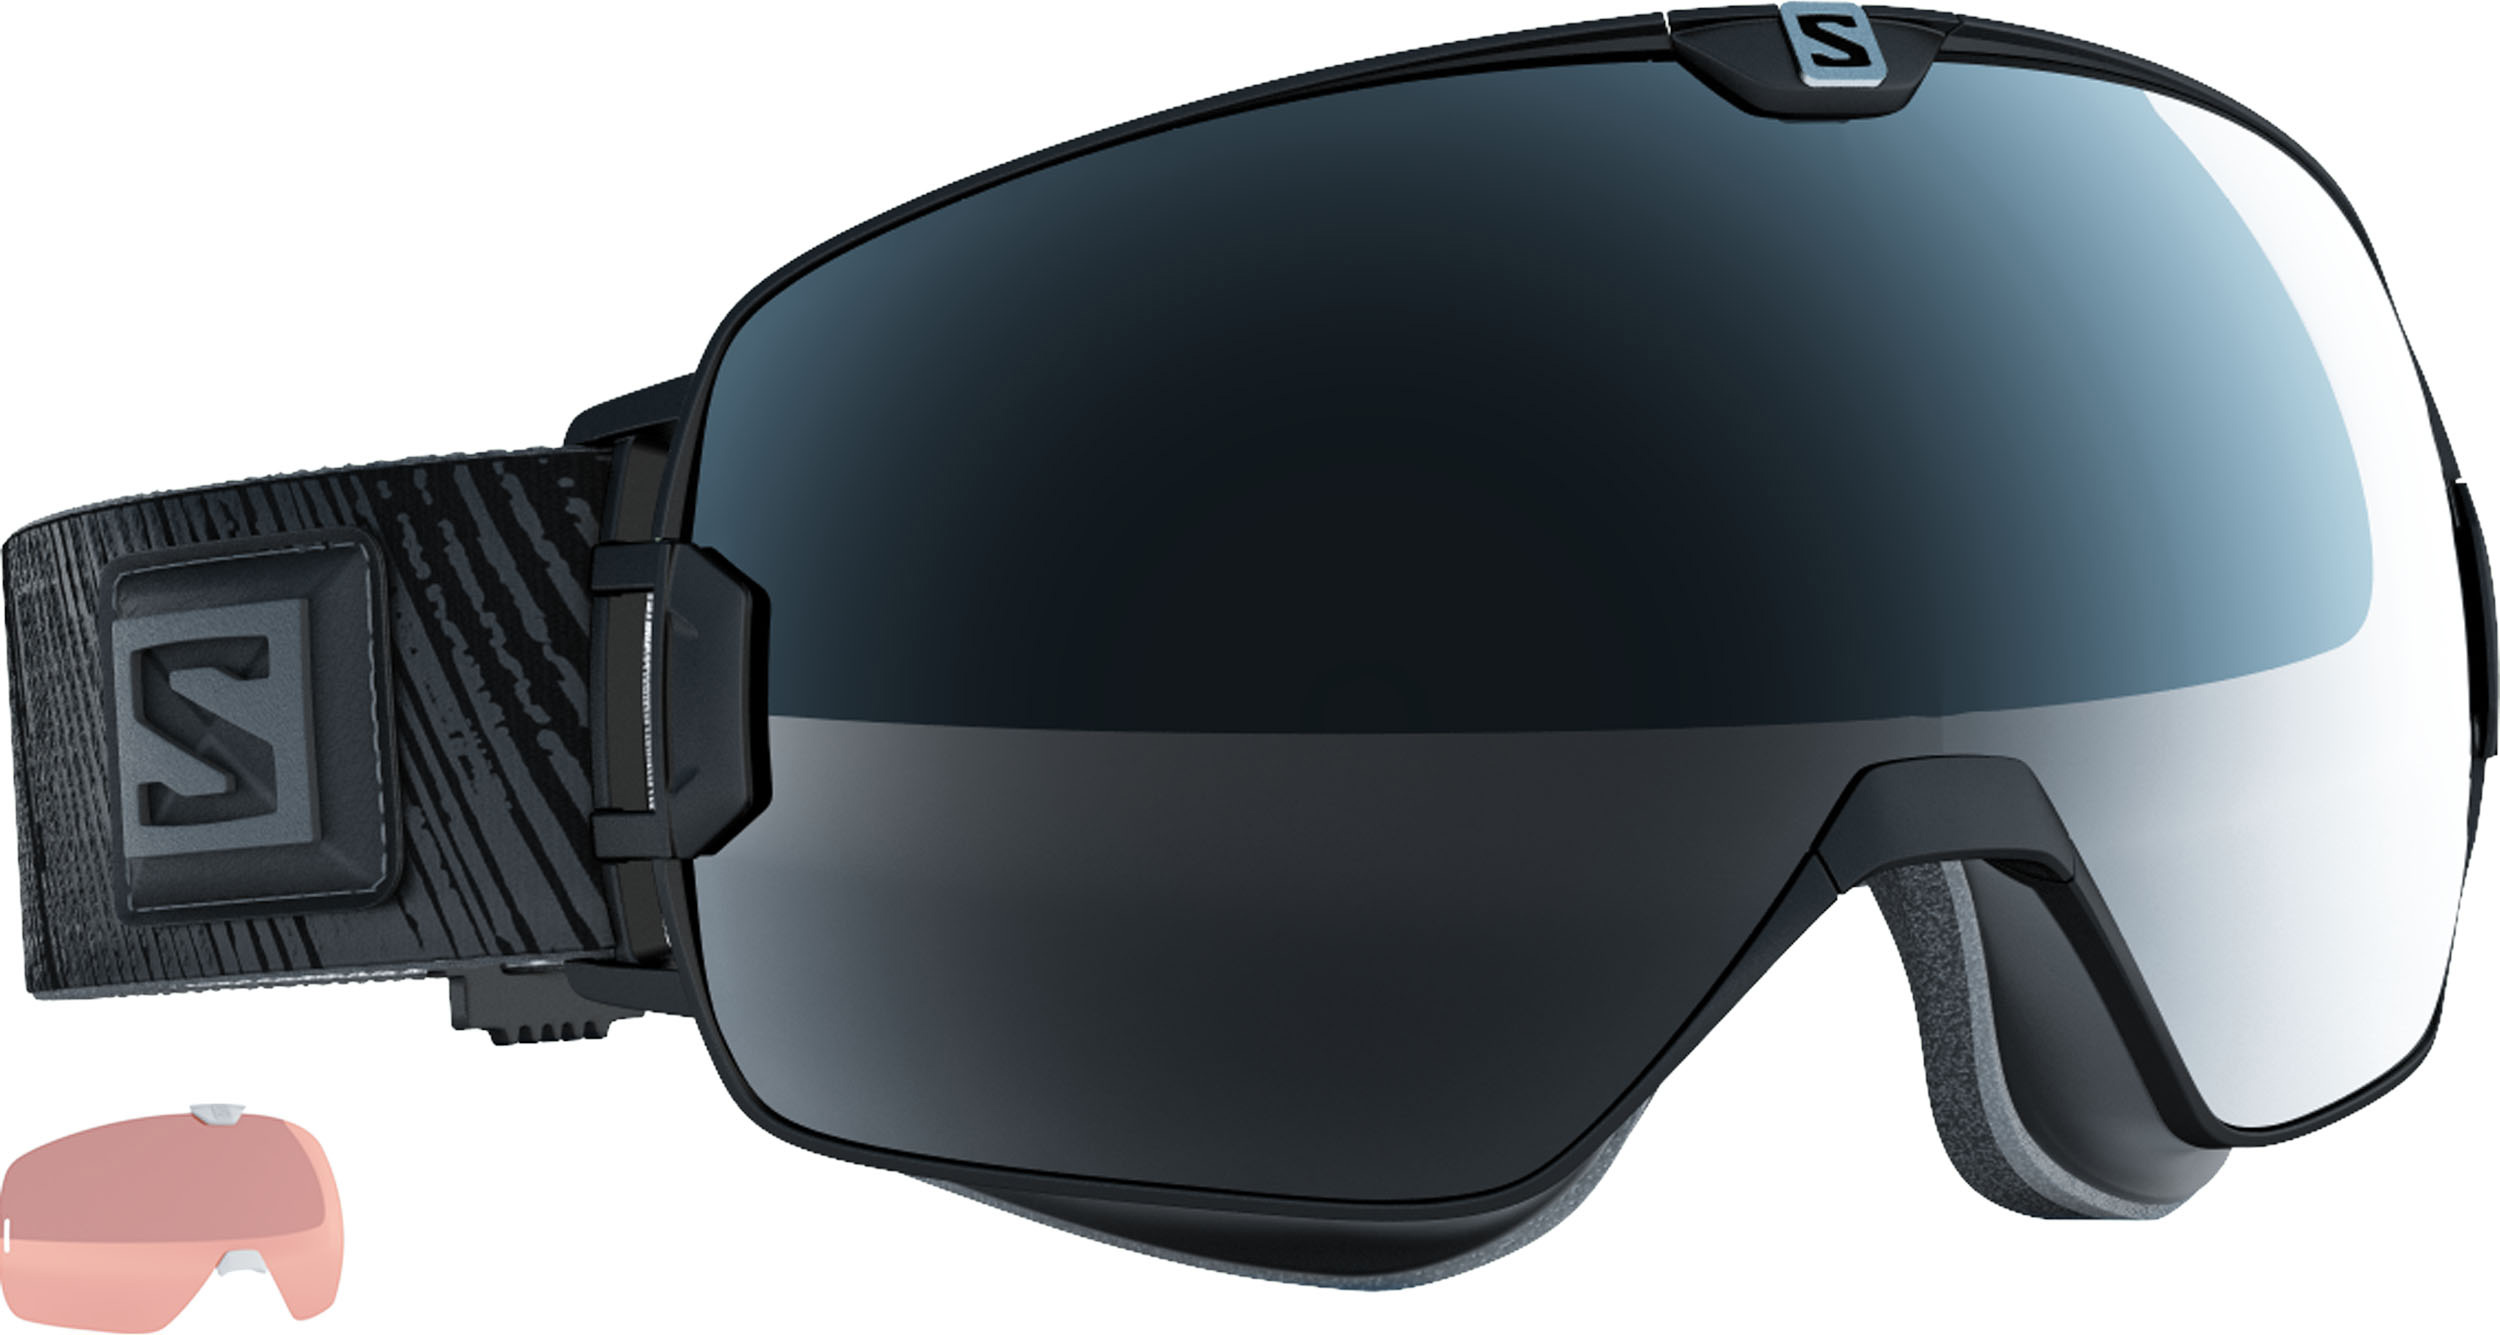 Lighed Airfield bliver nervøs Win Salomon X-Max goggles worth £150 | Fall Line Skiing